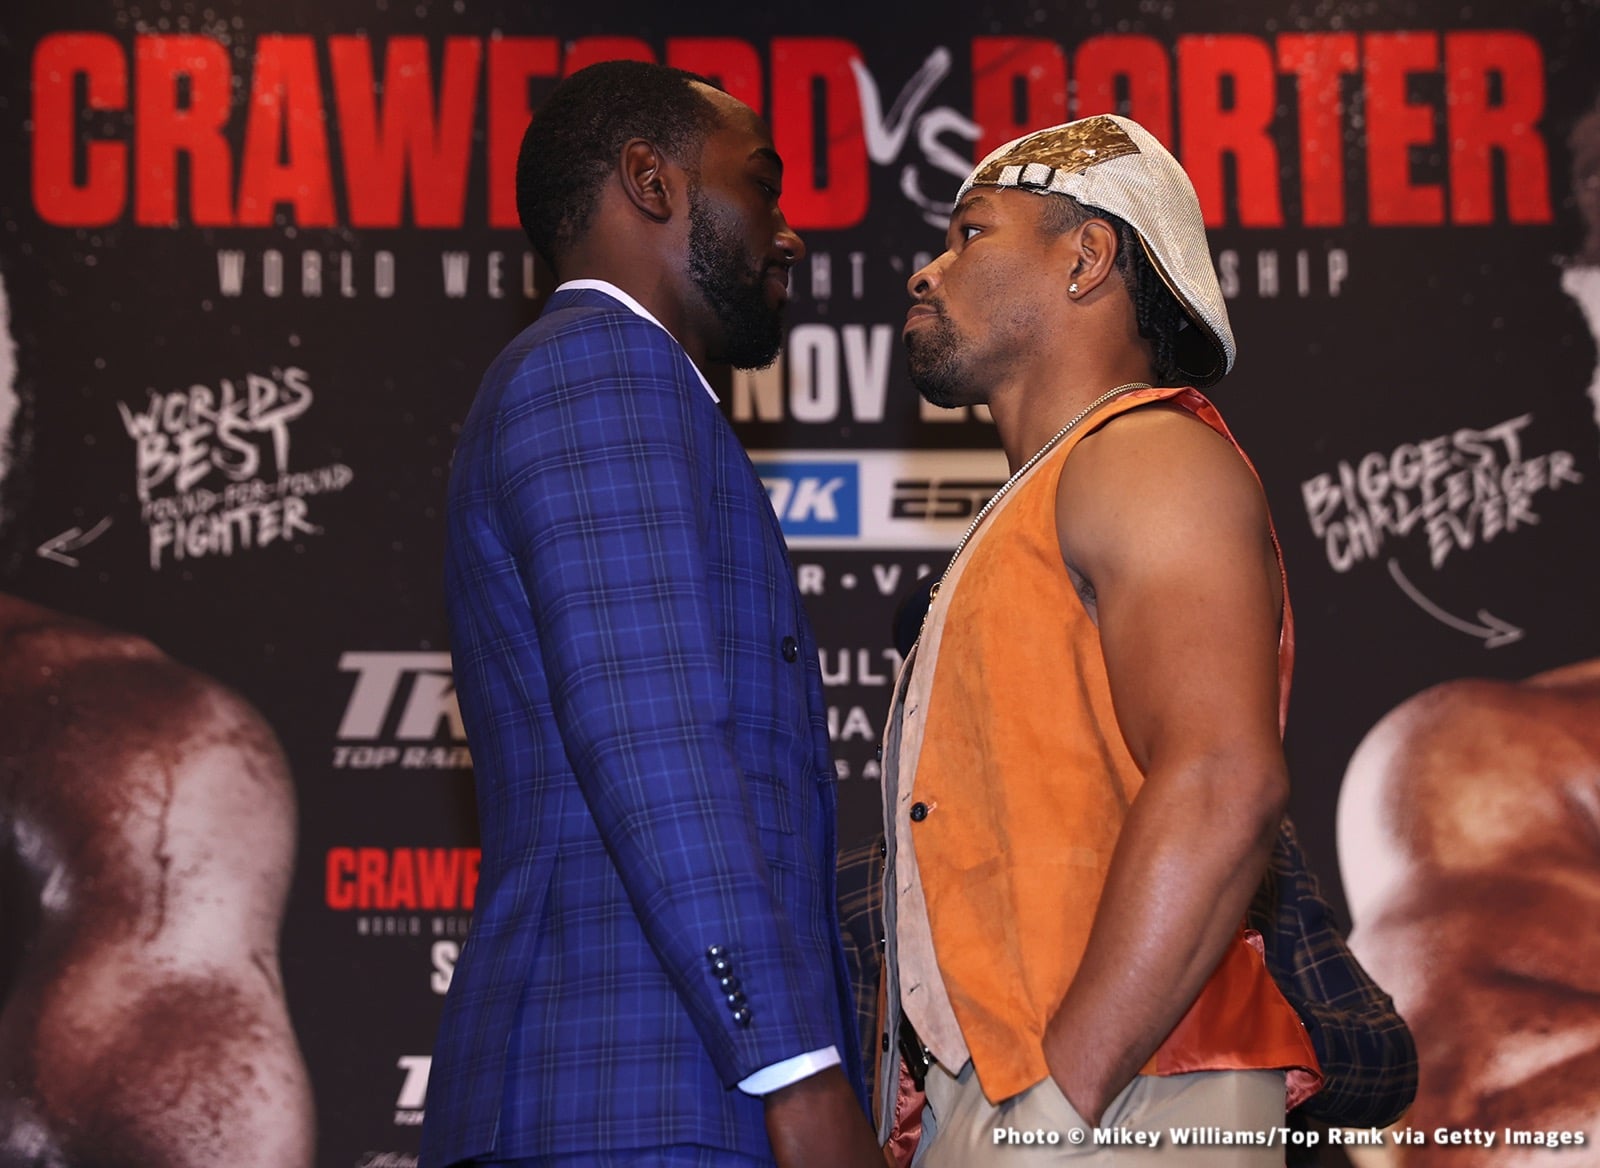 Image: Crawford vs. Porter: Less than 300 tickets remaining for Nov.20th fight in Laa Vegas